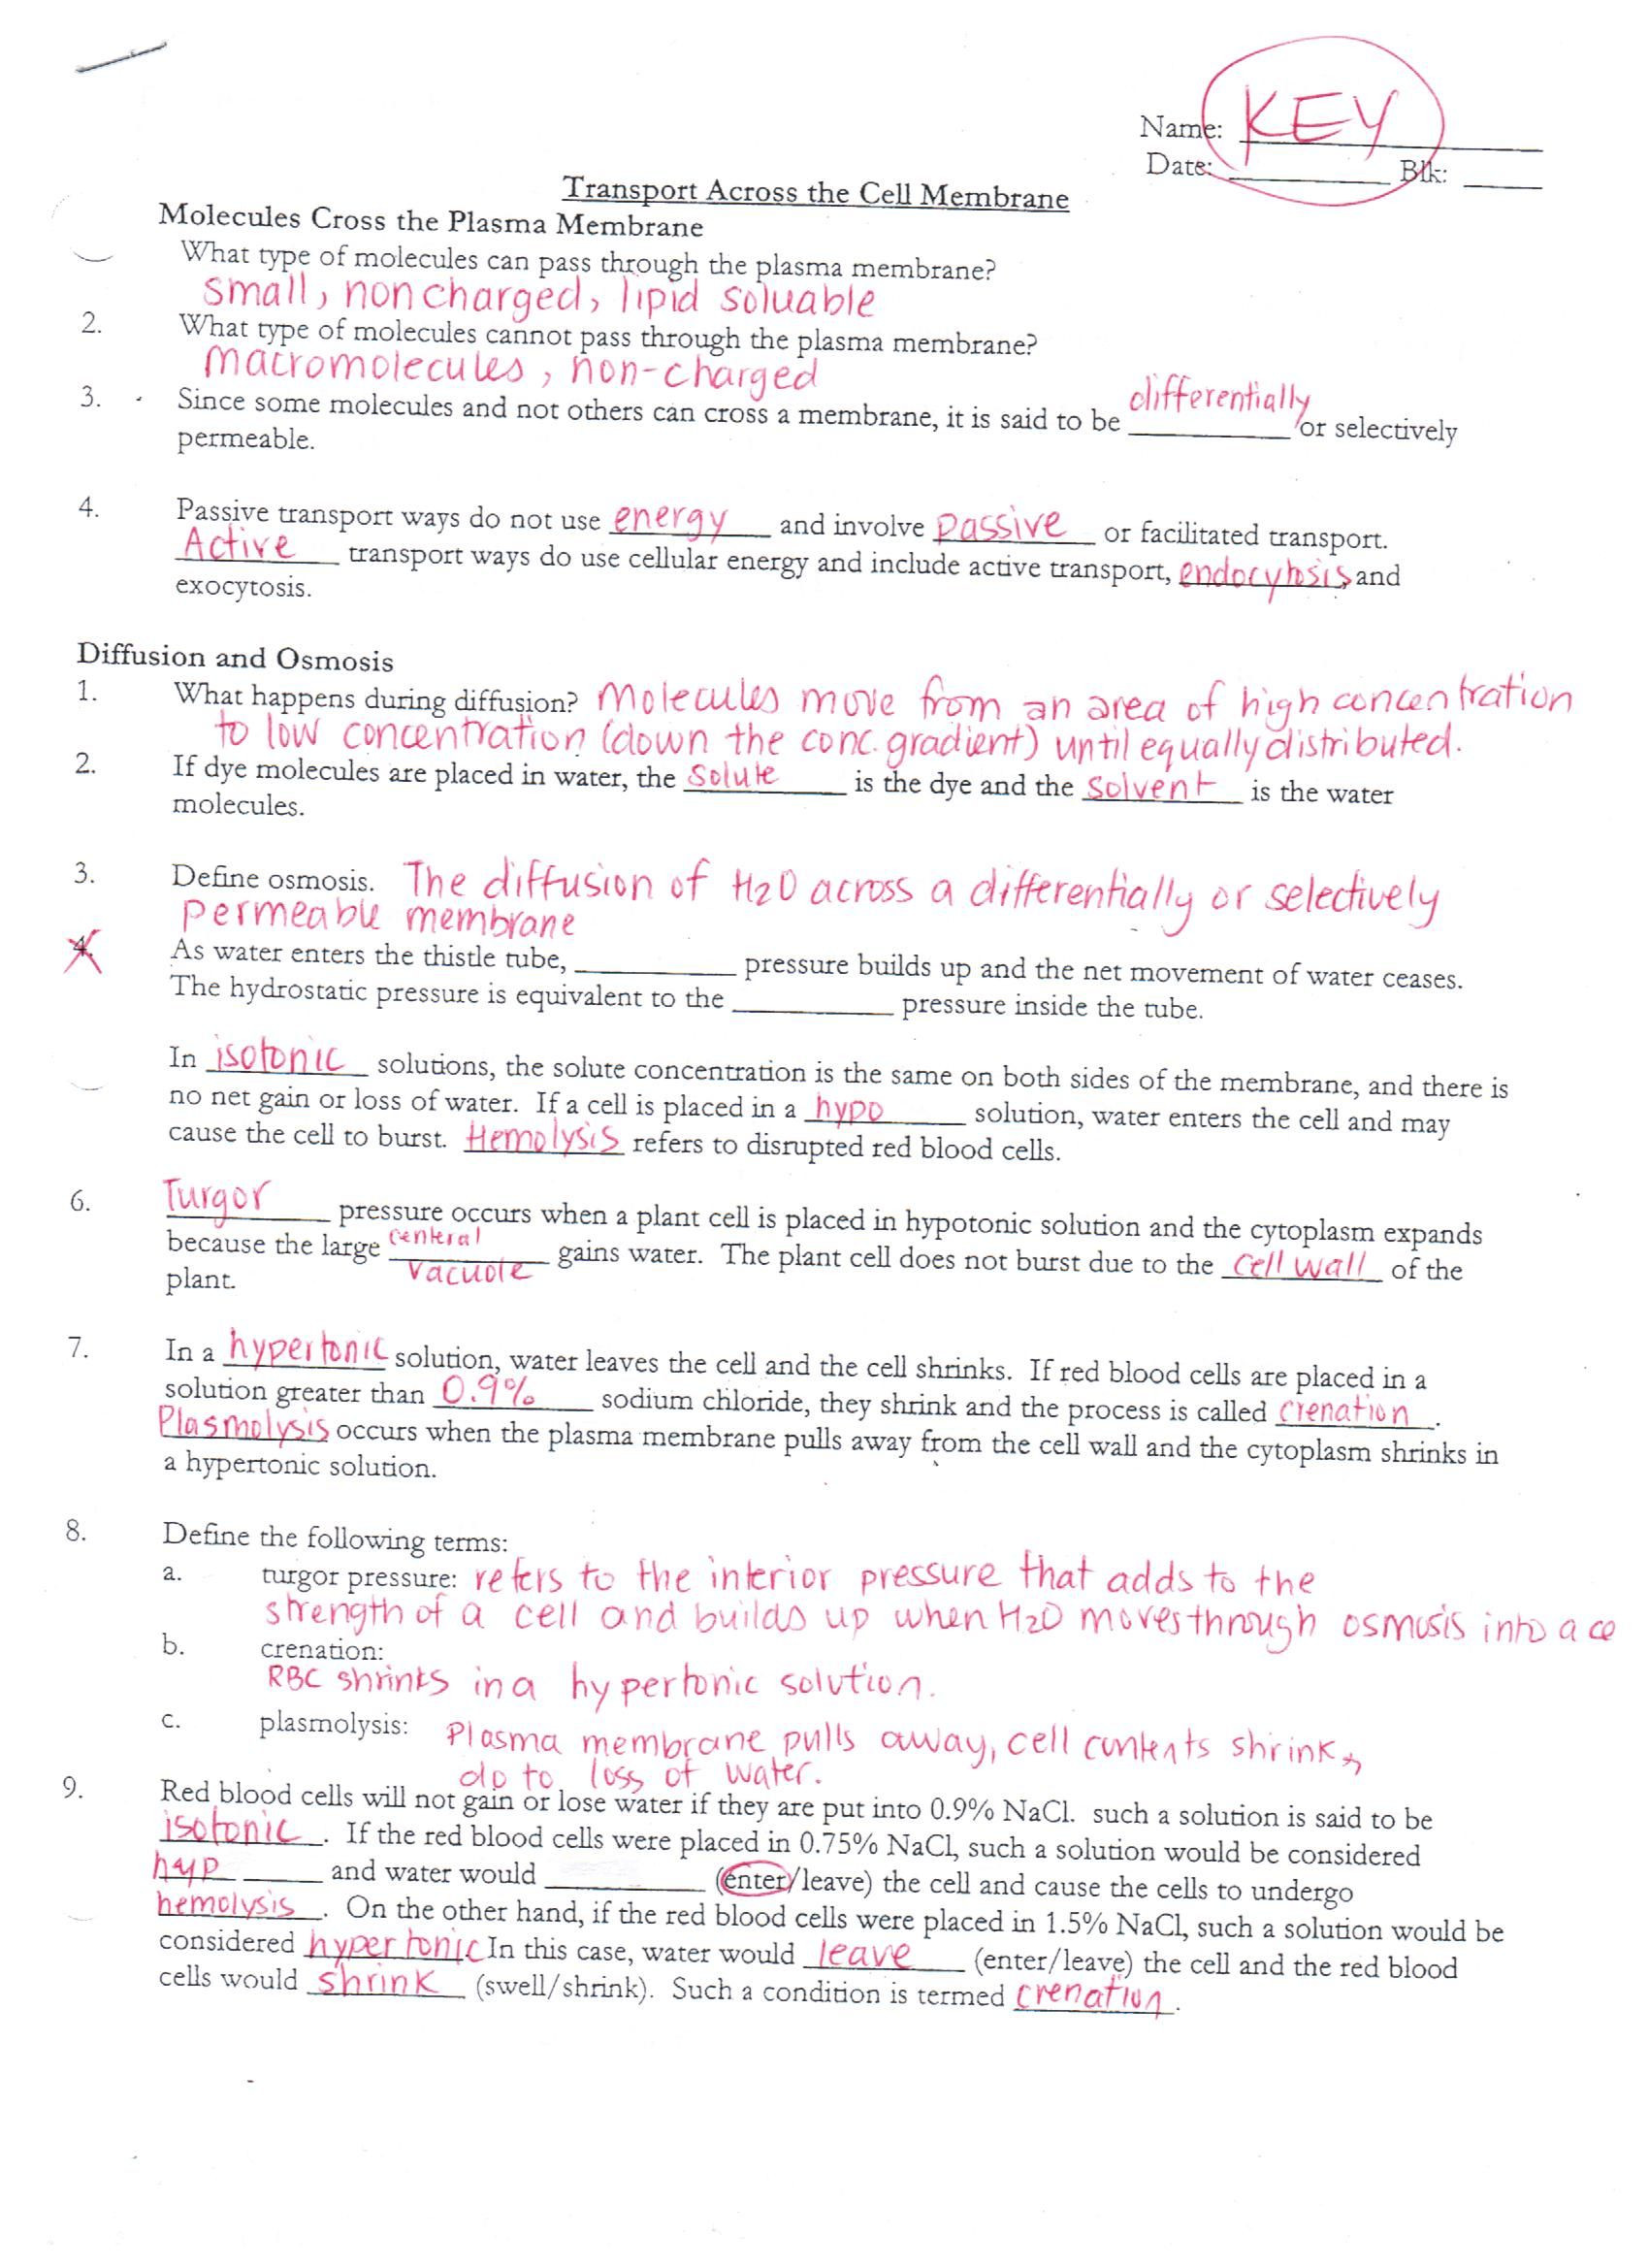 Cell Membrane Images Worksheet Answers Cell Membrane Coloring Worksheet Answer Key